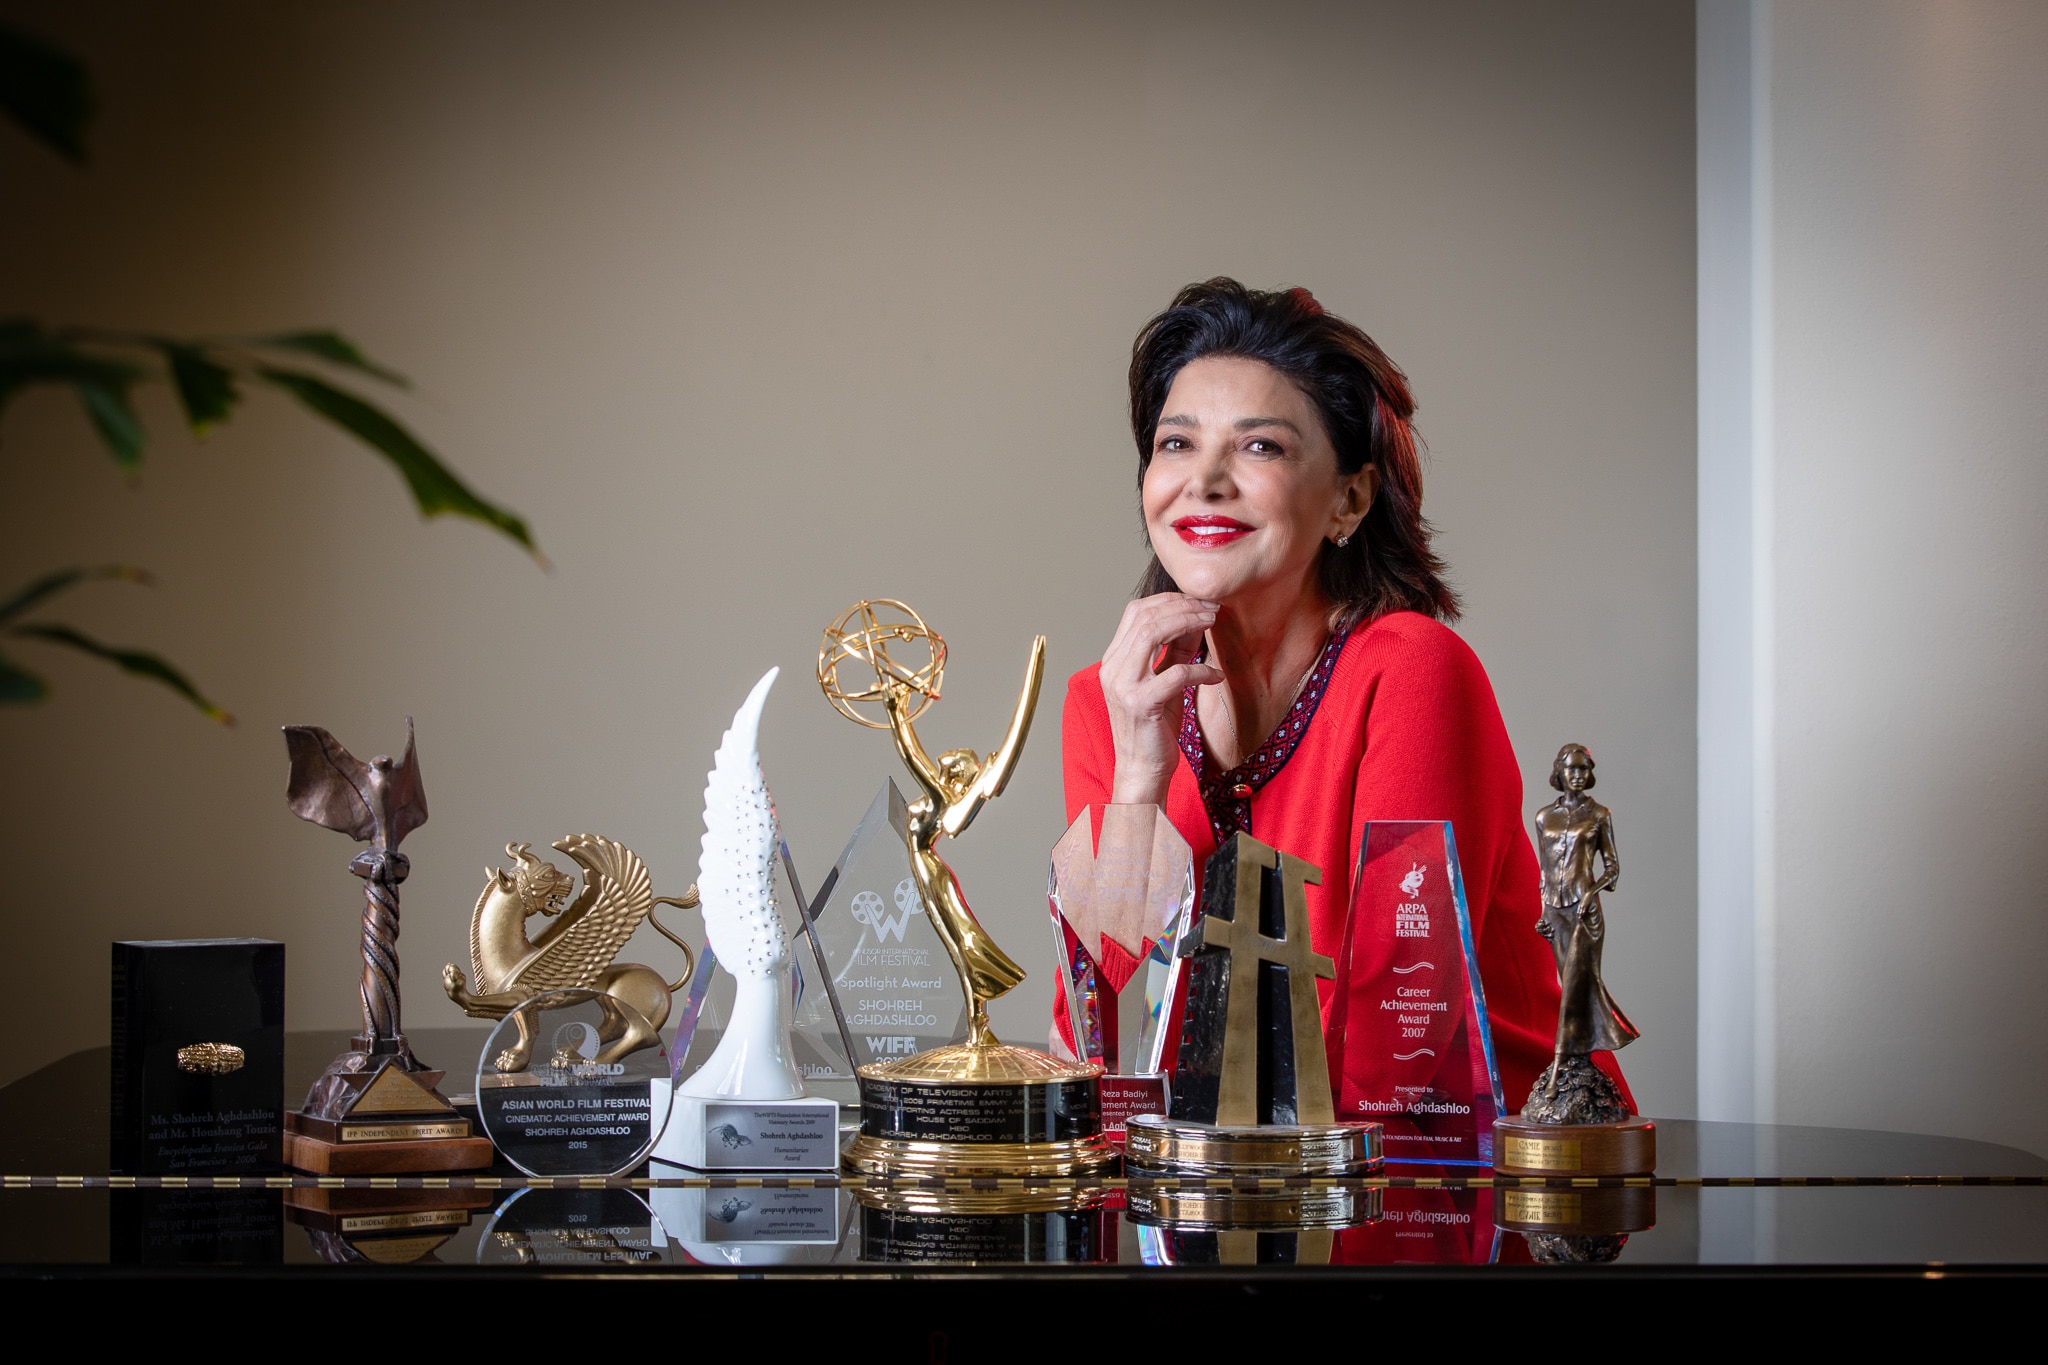 Shohreh Aghdashloo is an Emmy Award-winning, Oscar-nominated actress and currently starring in the TV series